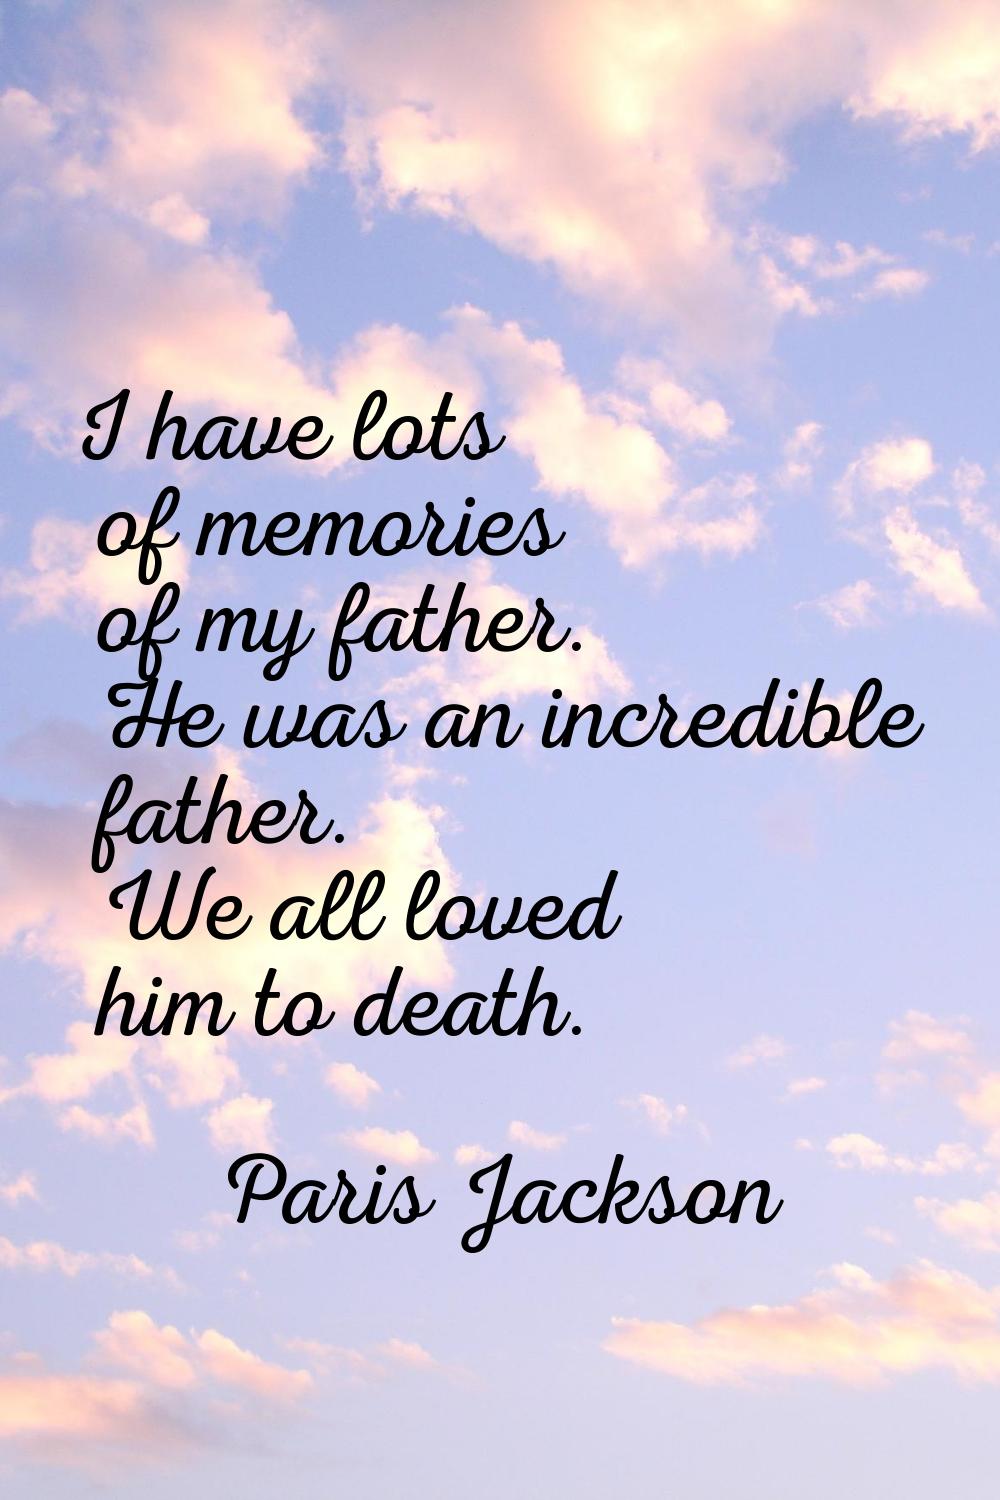 I have lots of memories of my father. He was an incredible father. We all loved him to death.